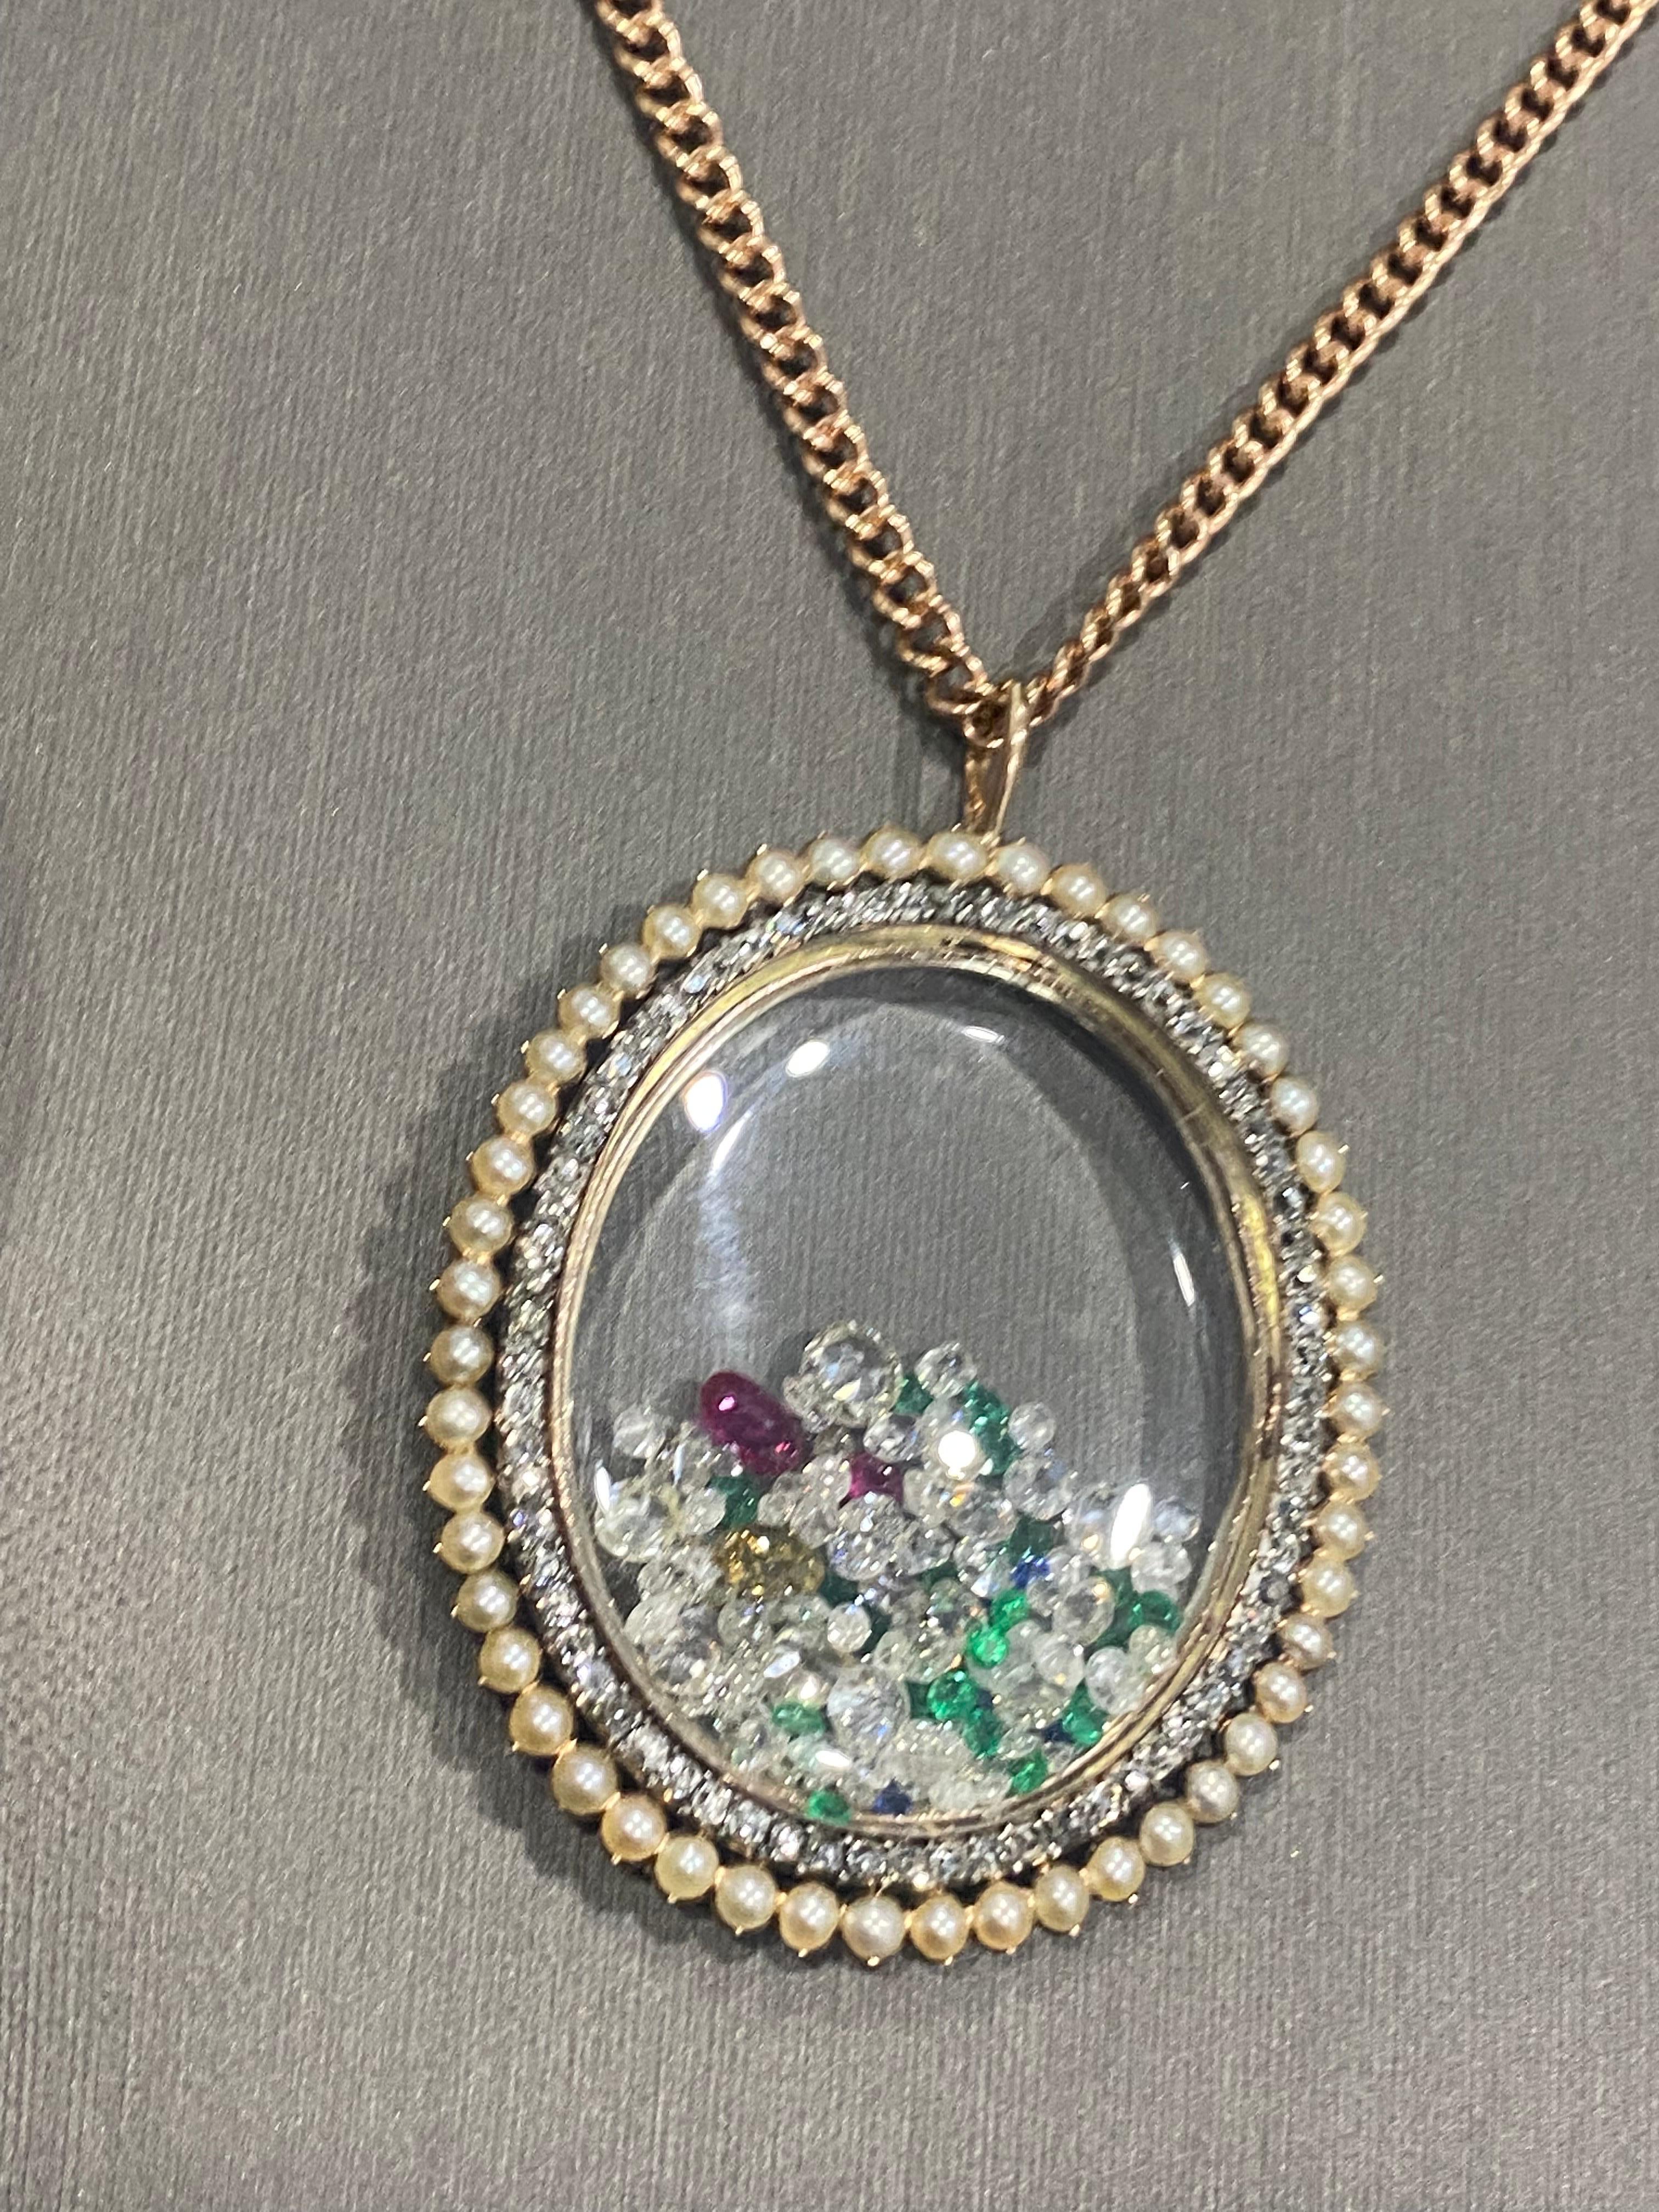 One of our newest favorite creations. A one-of-a-kind treasure. The large oval shaped oldeuropeancut diamond (2.50 CTW) and 50 pearls surround this locket derived from the Victorian Period, Circa 1880’s. 
It has been transformed into a Chic, elegant